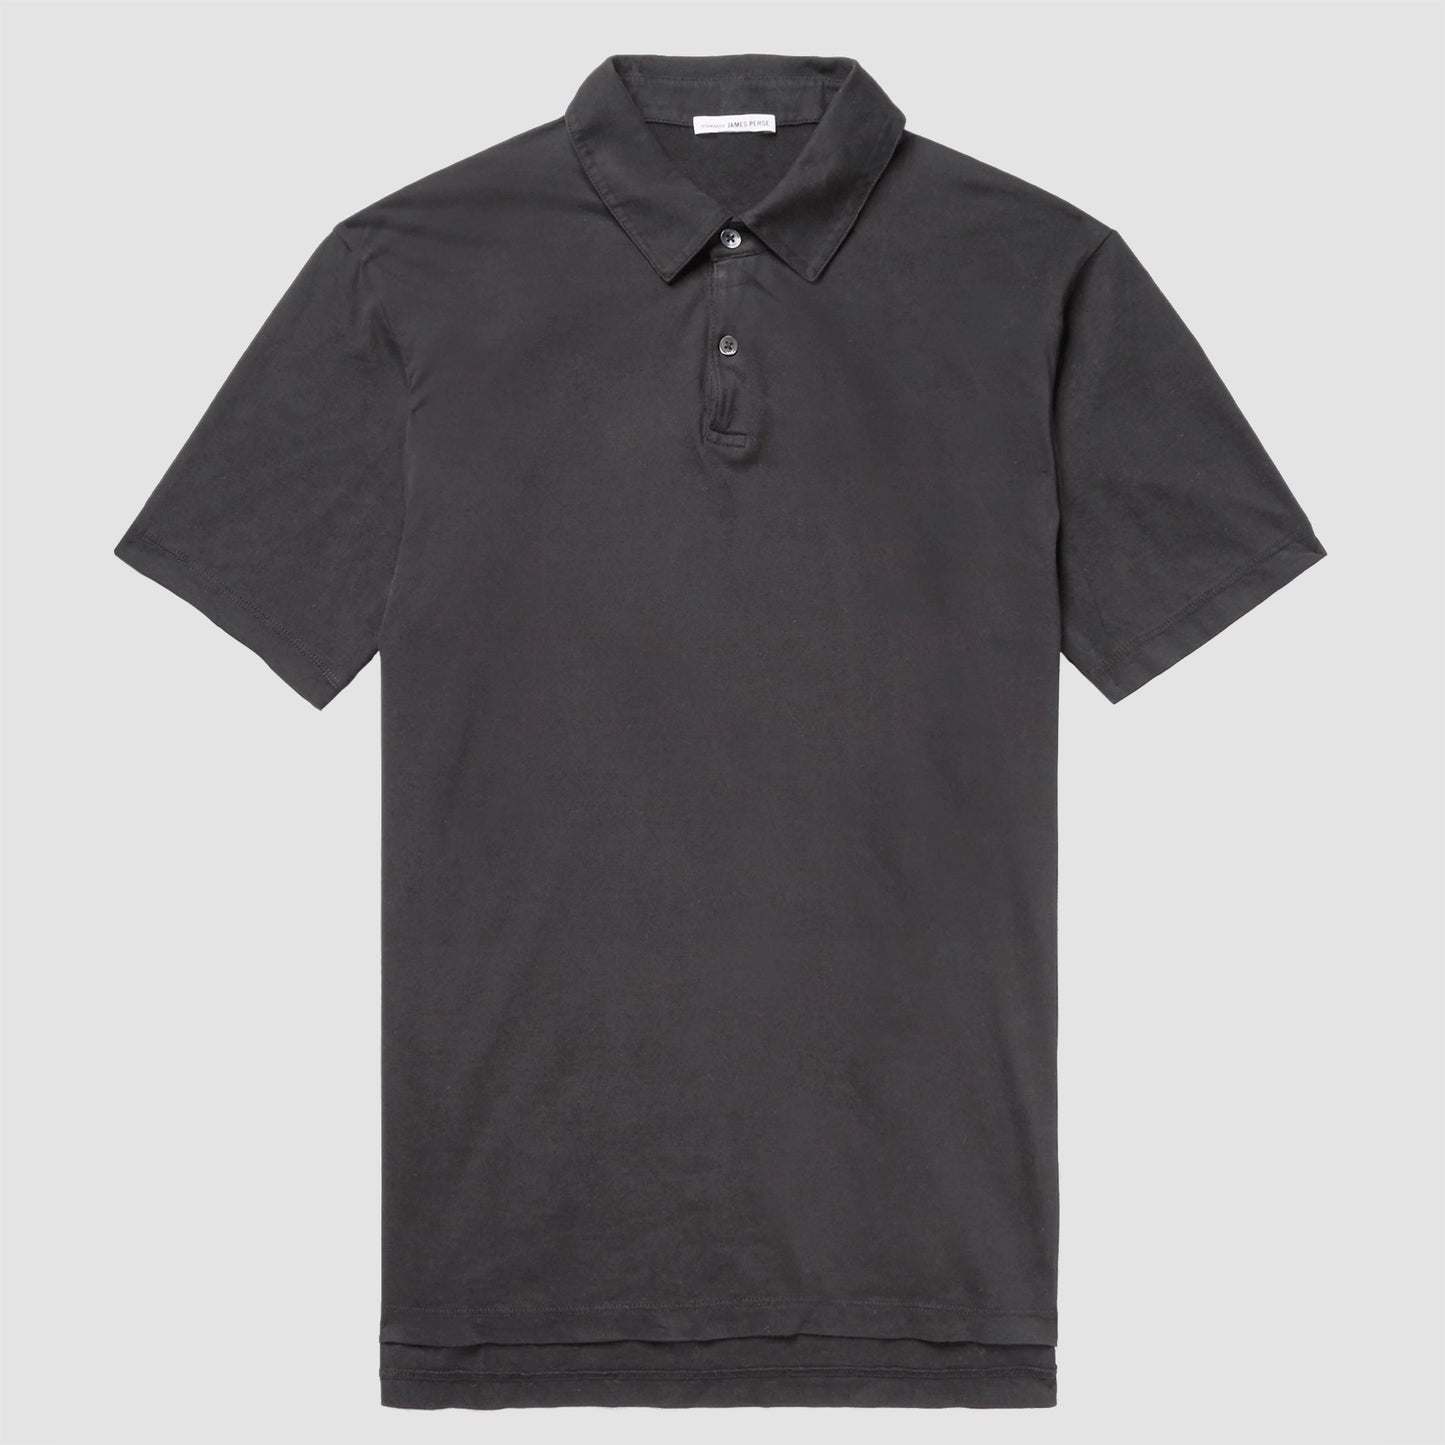 Sueded Jersey Polo - Carbon